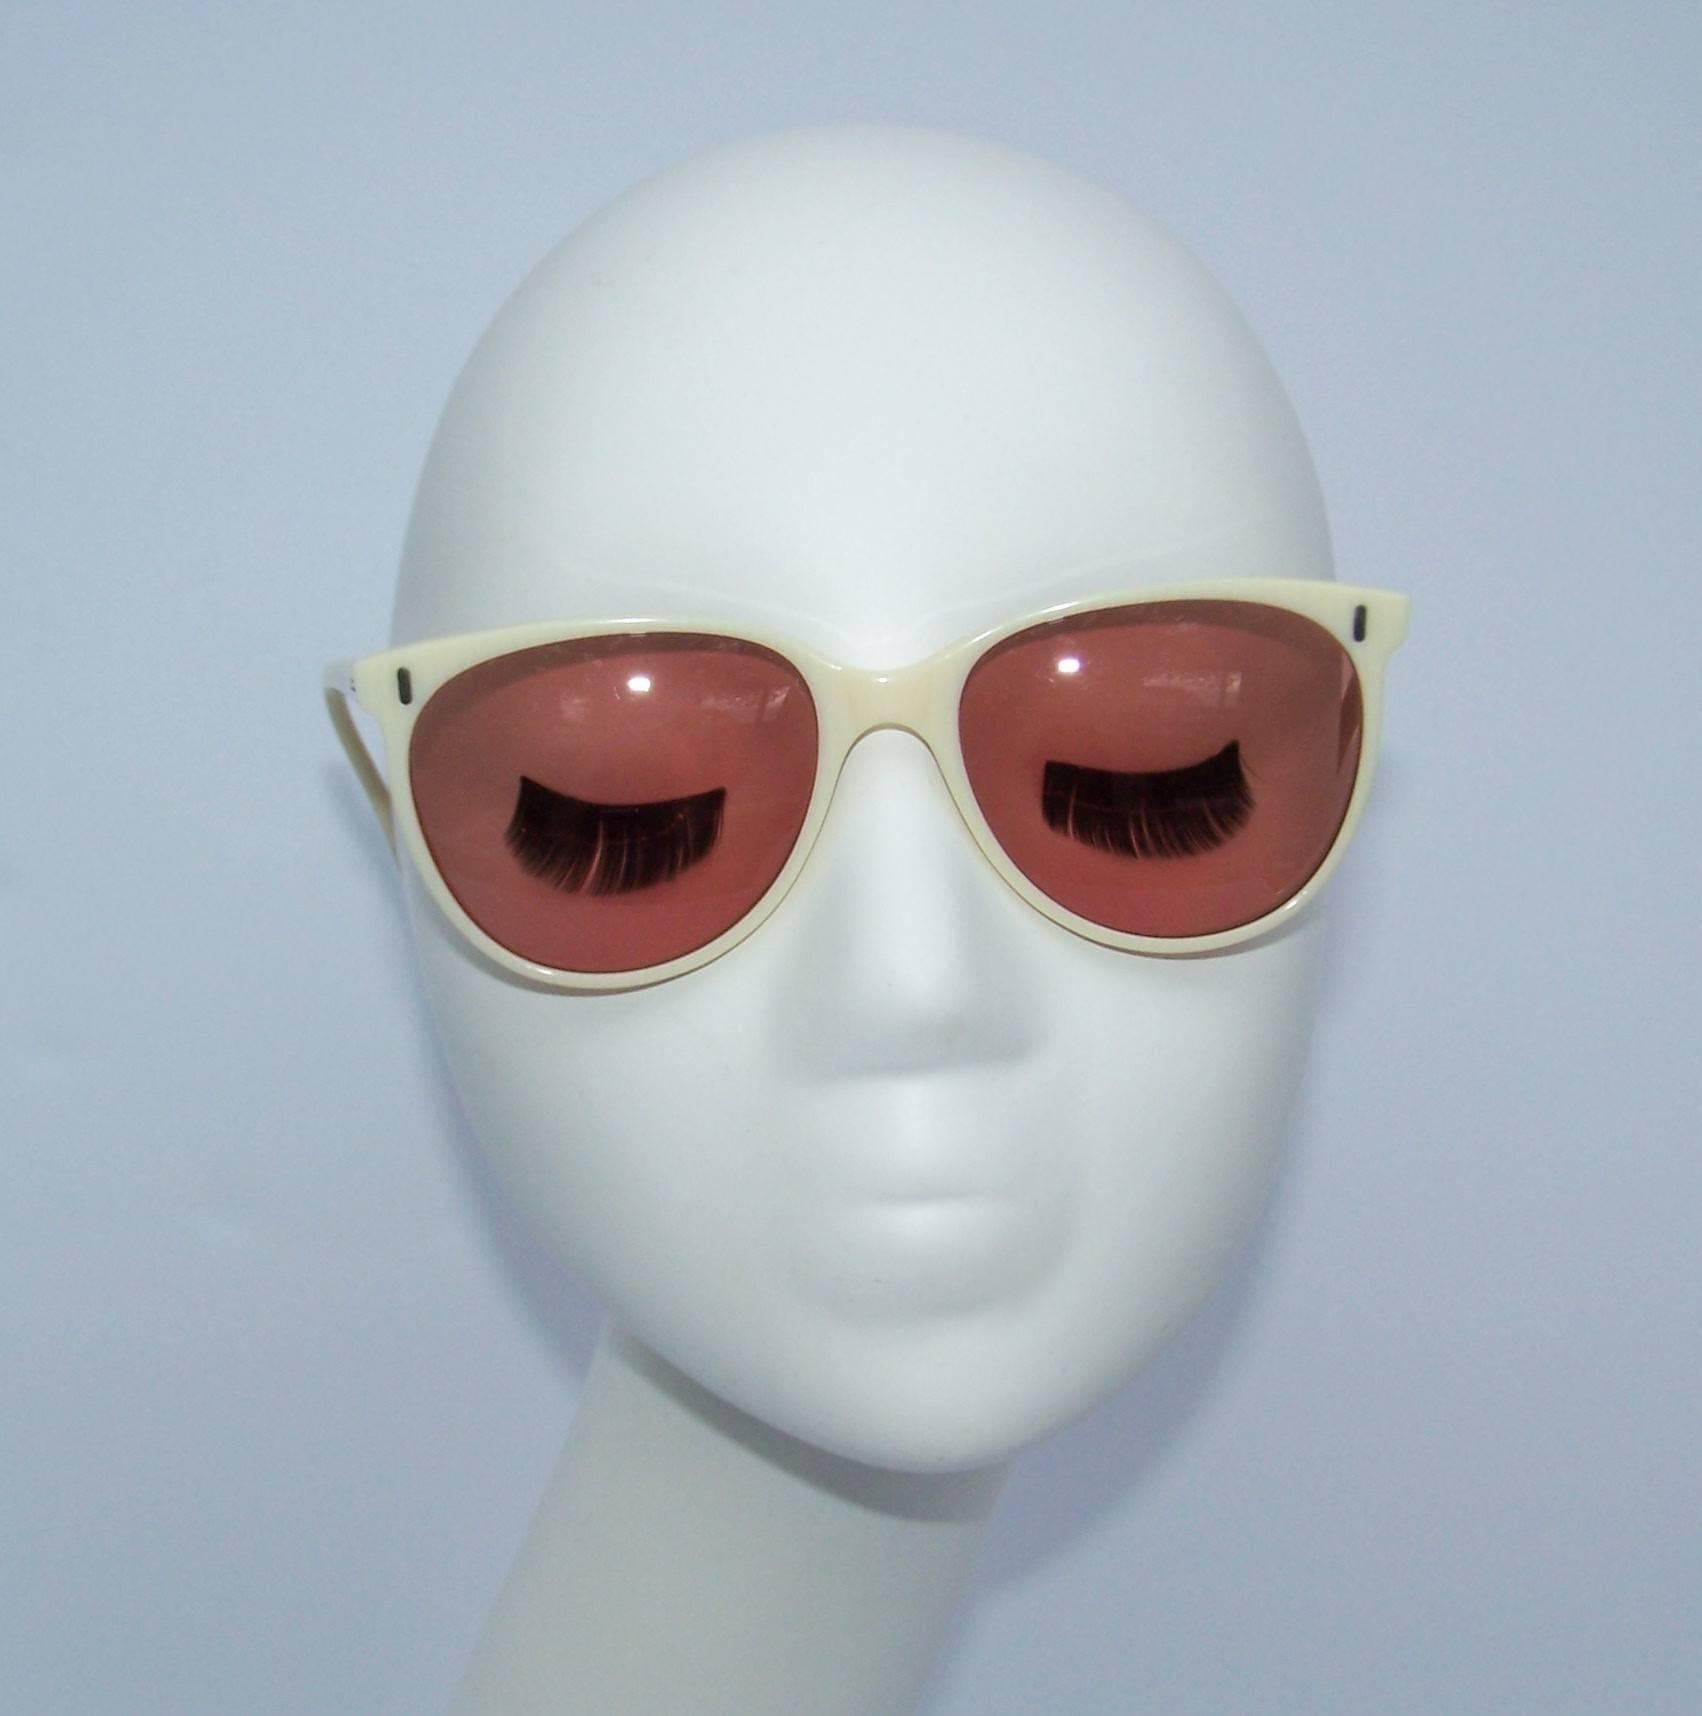 See the world through rose colored glasses with these vintage Calvin Klein sunglasses reminiscent of 1940's eyewear.  The off white frames feature a subtle striated design which lends them the appearance of old ivory.  The perfect accessory for your